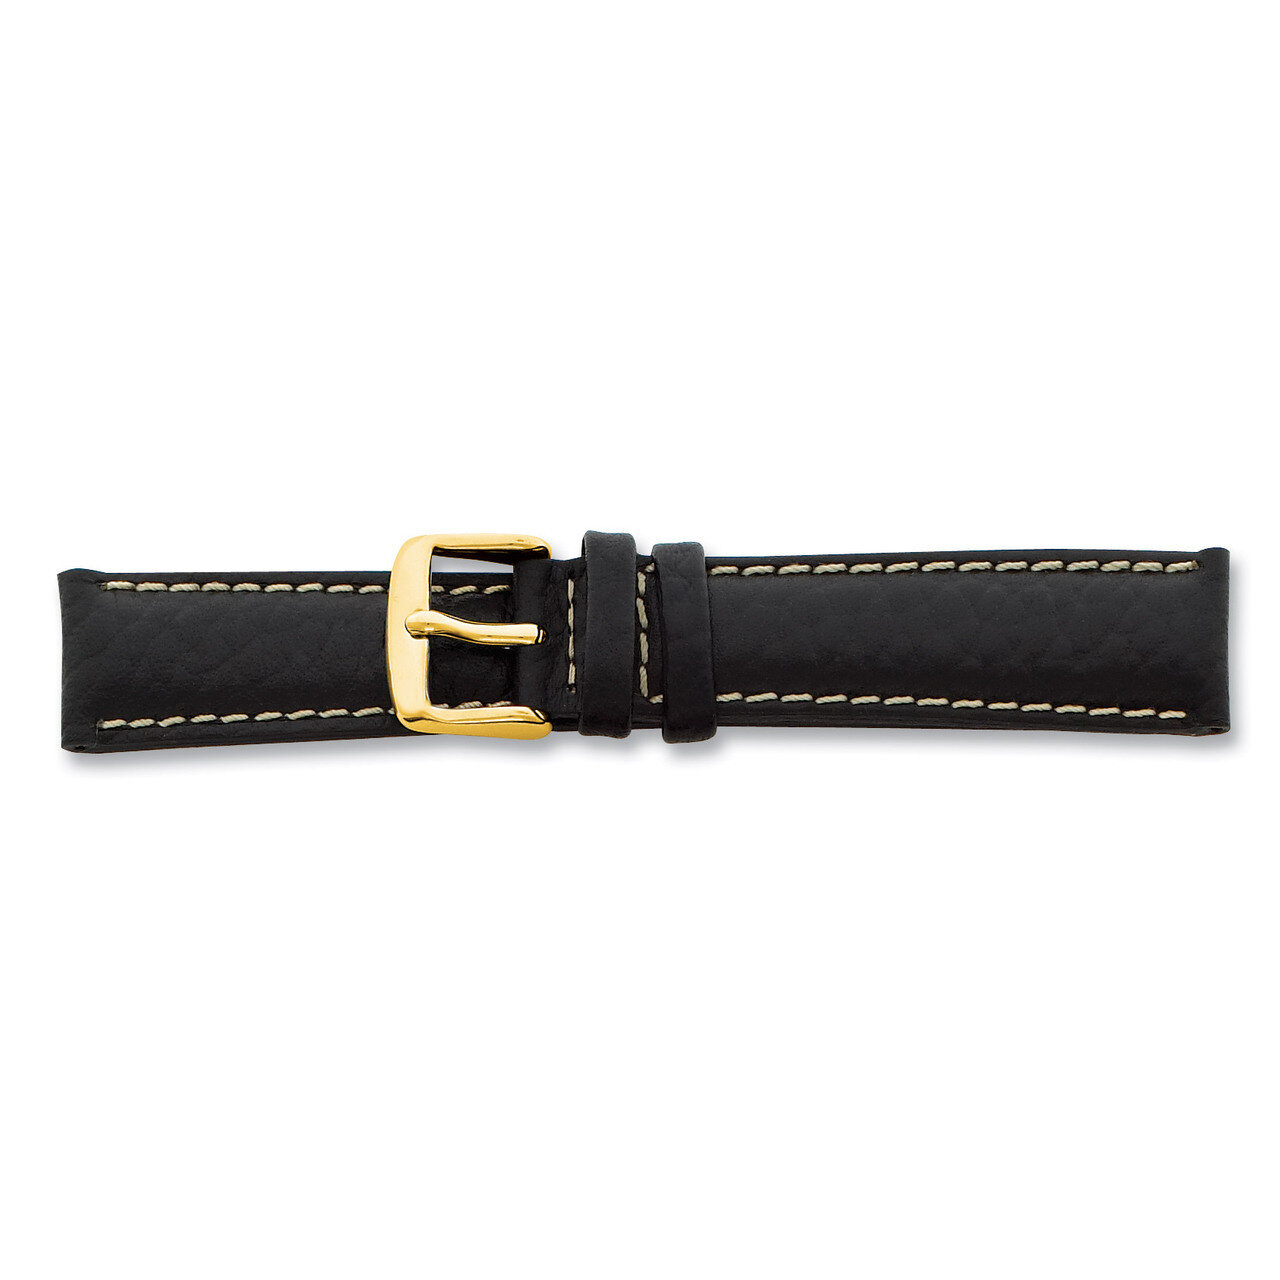 17mm Black Leather White Stitch Buckle Watch Band 7.5 Inch Gold-tone BAY99-17